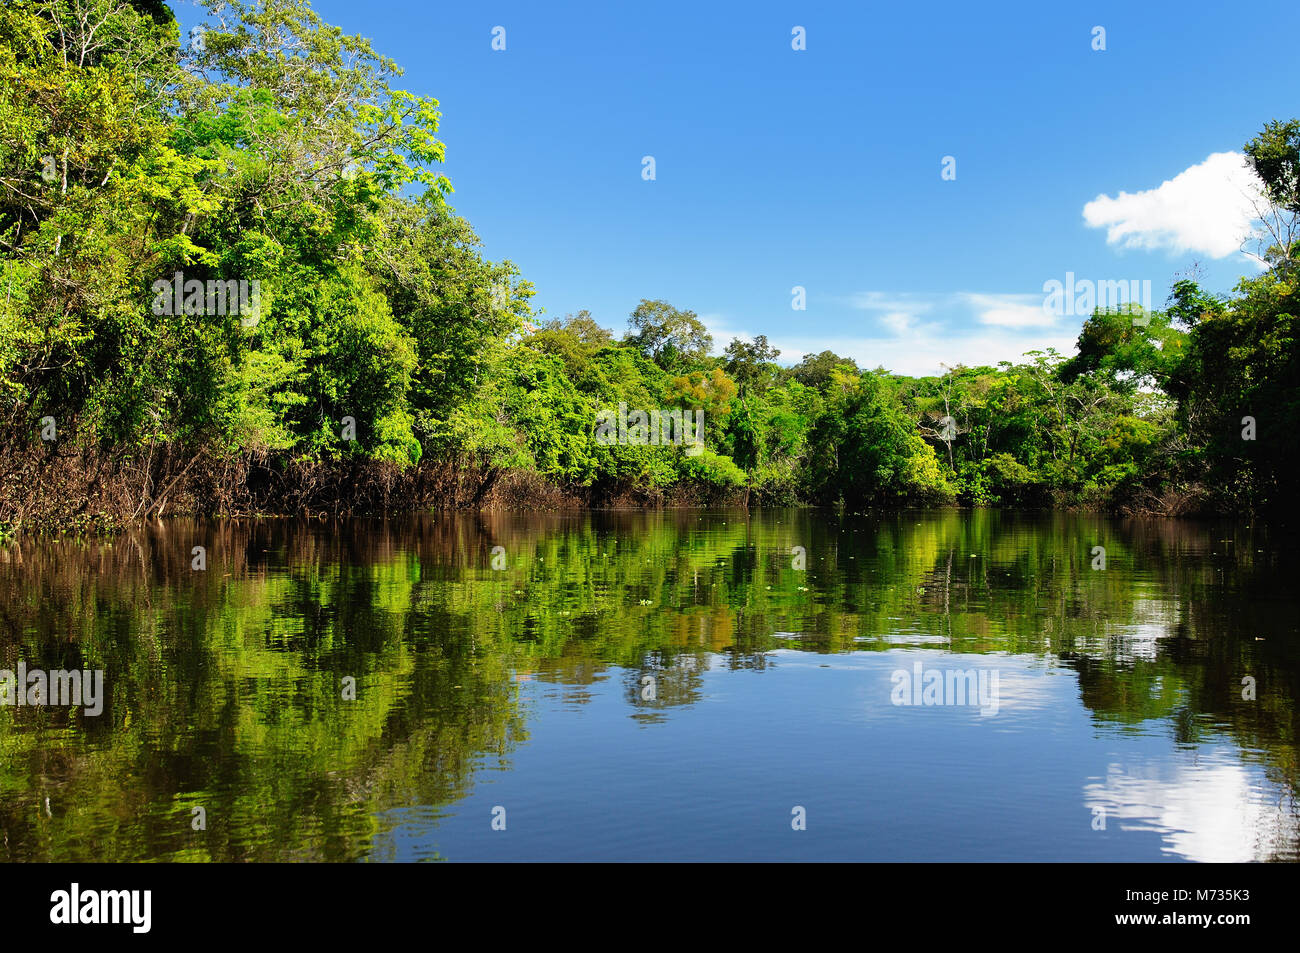 The Amazonian jungle in South America explore on the boat Stock Photo